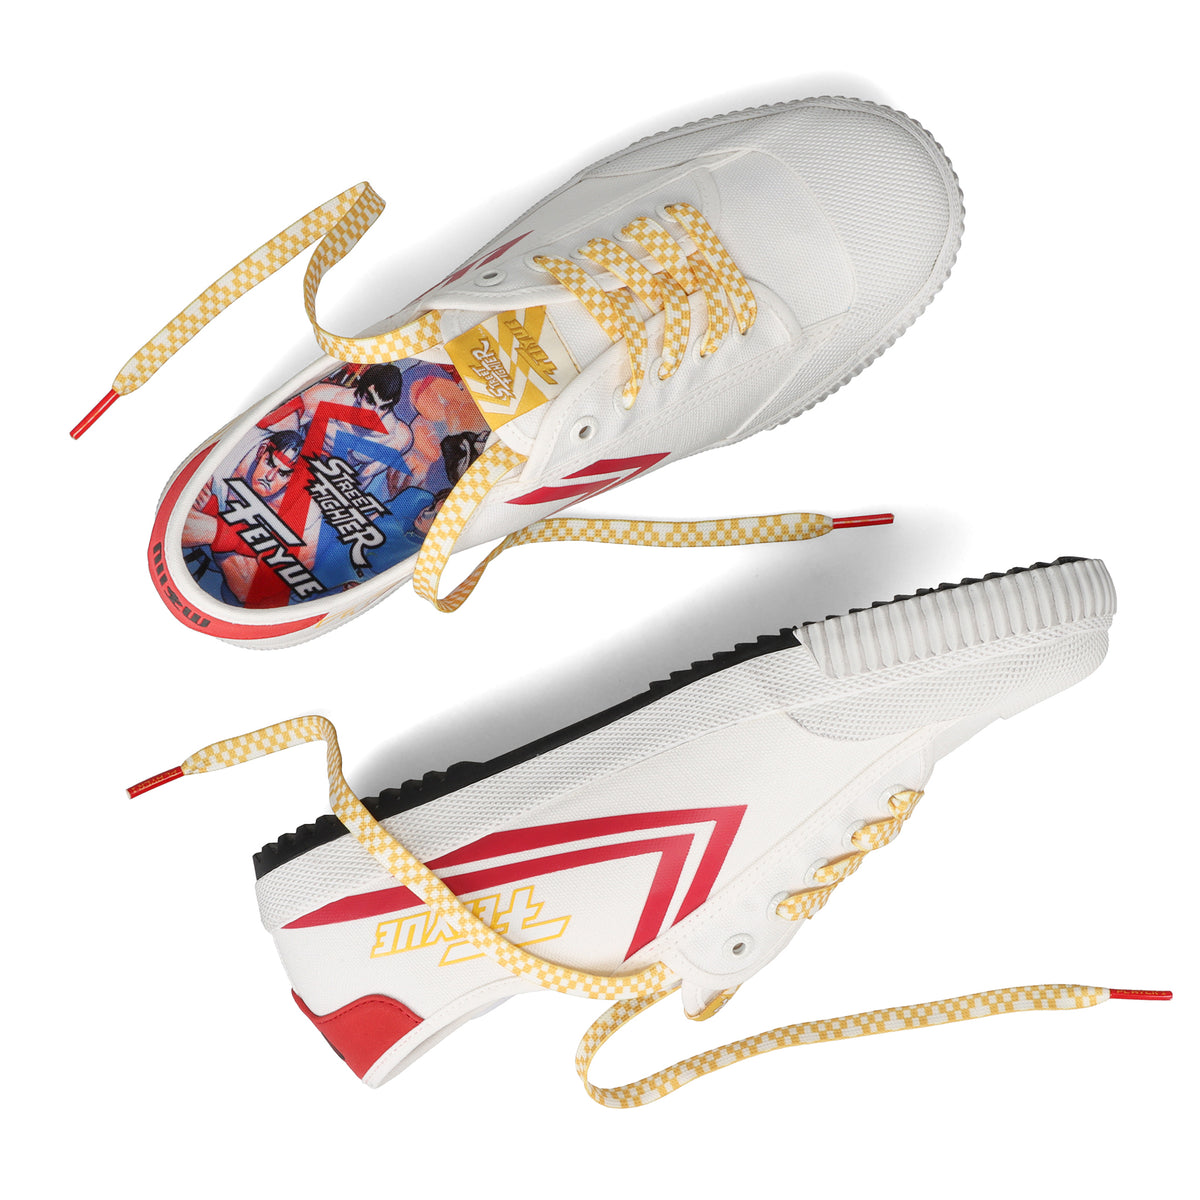 Street Fighter x Feiyue Shoes